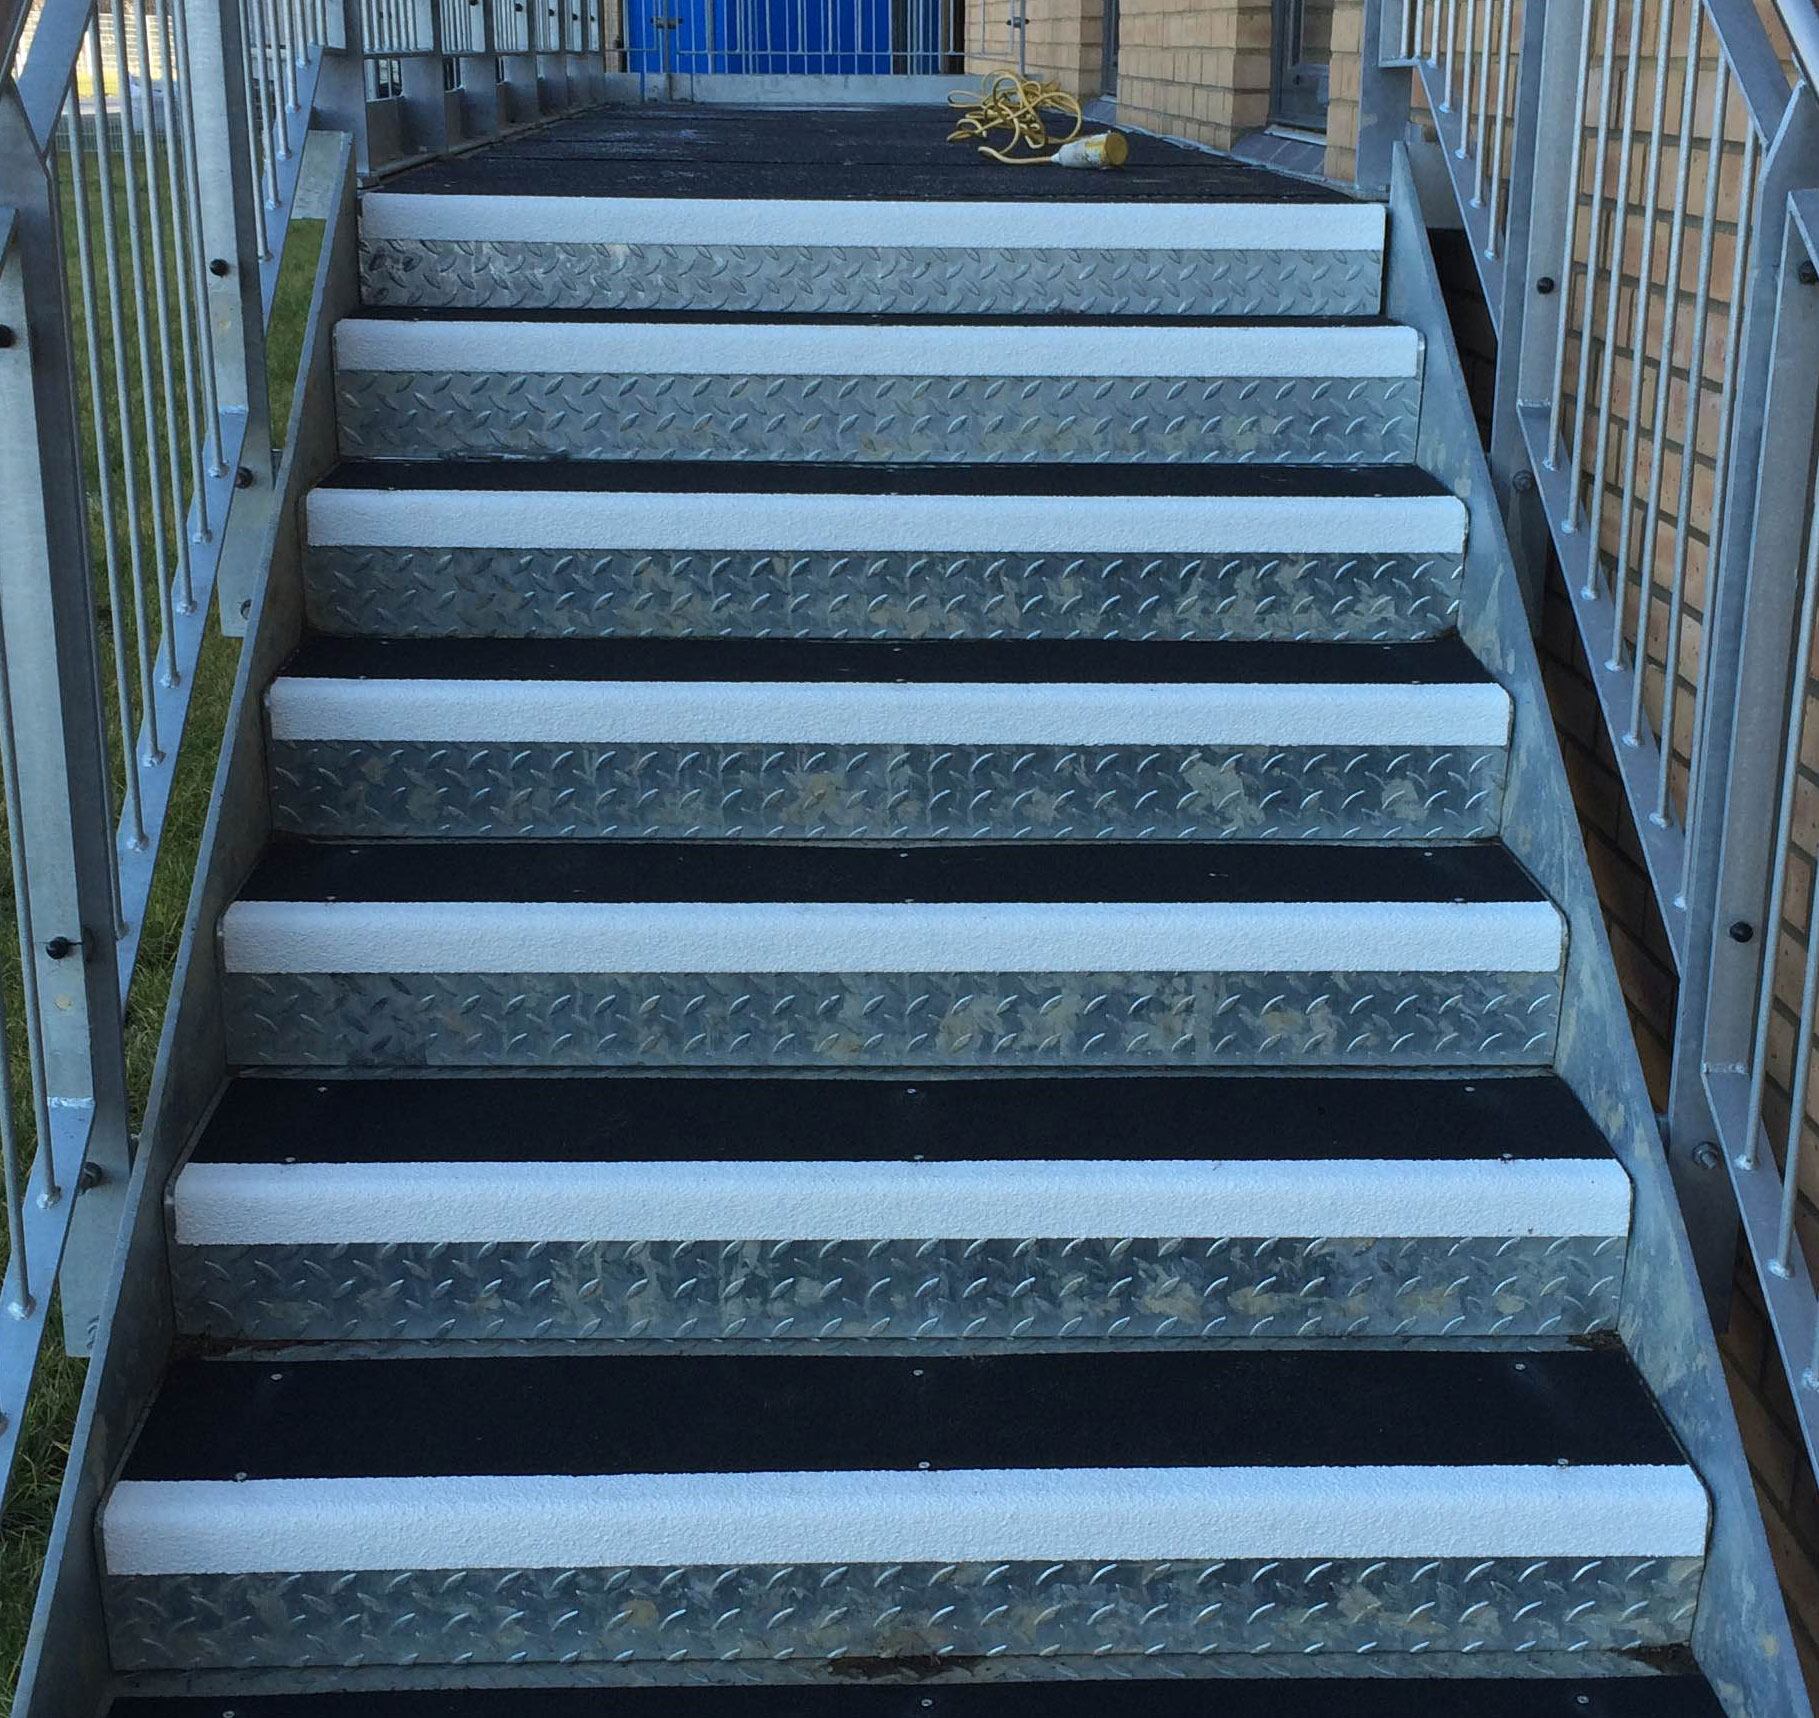 Anti-Slip GRP Stair Treads from GripClad - Stair Tread Covers